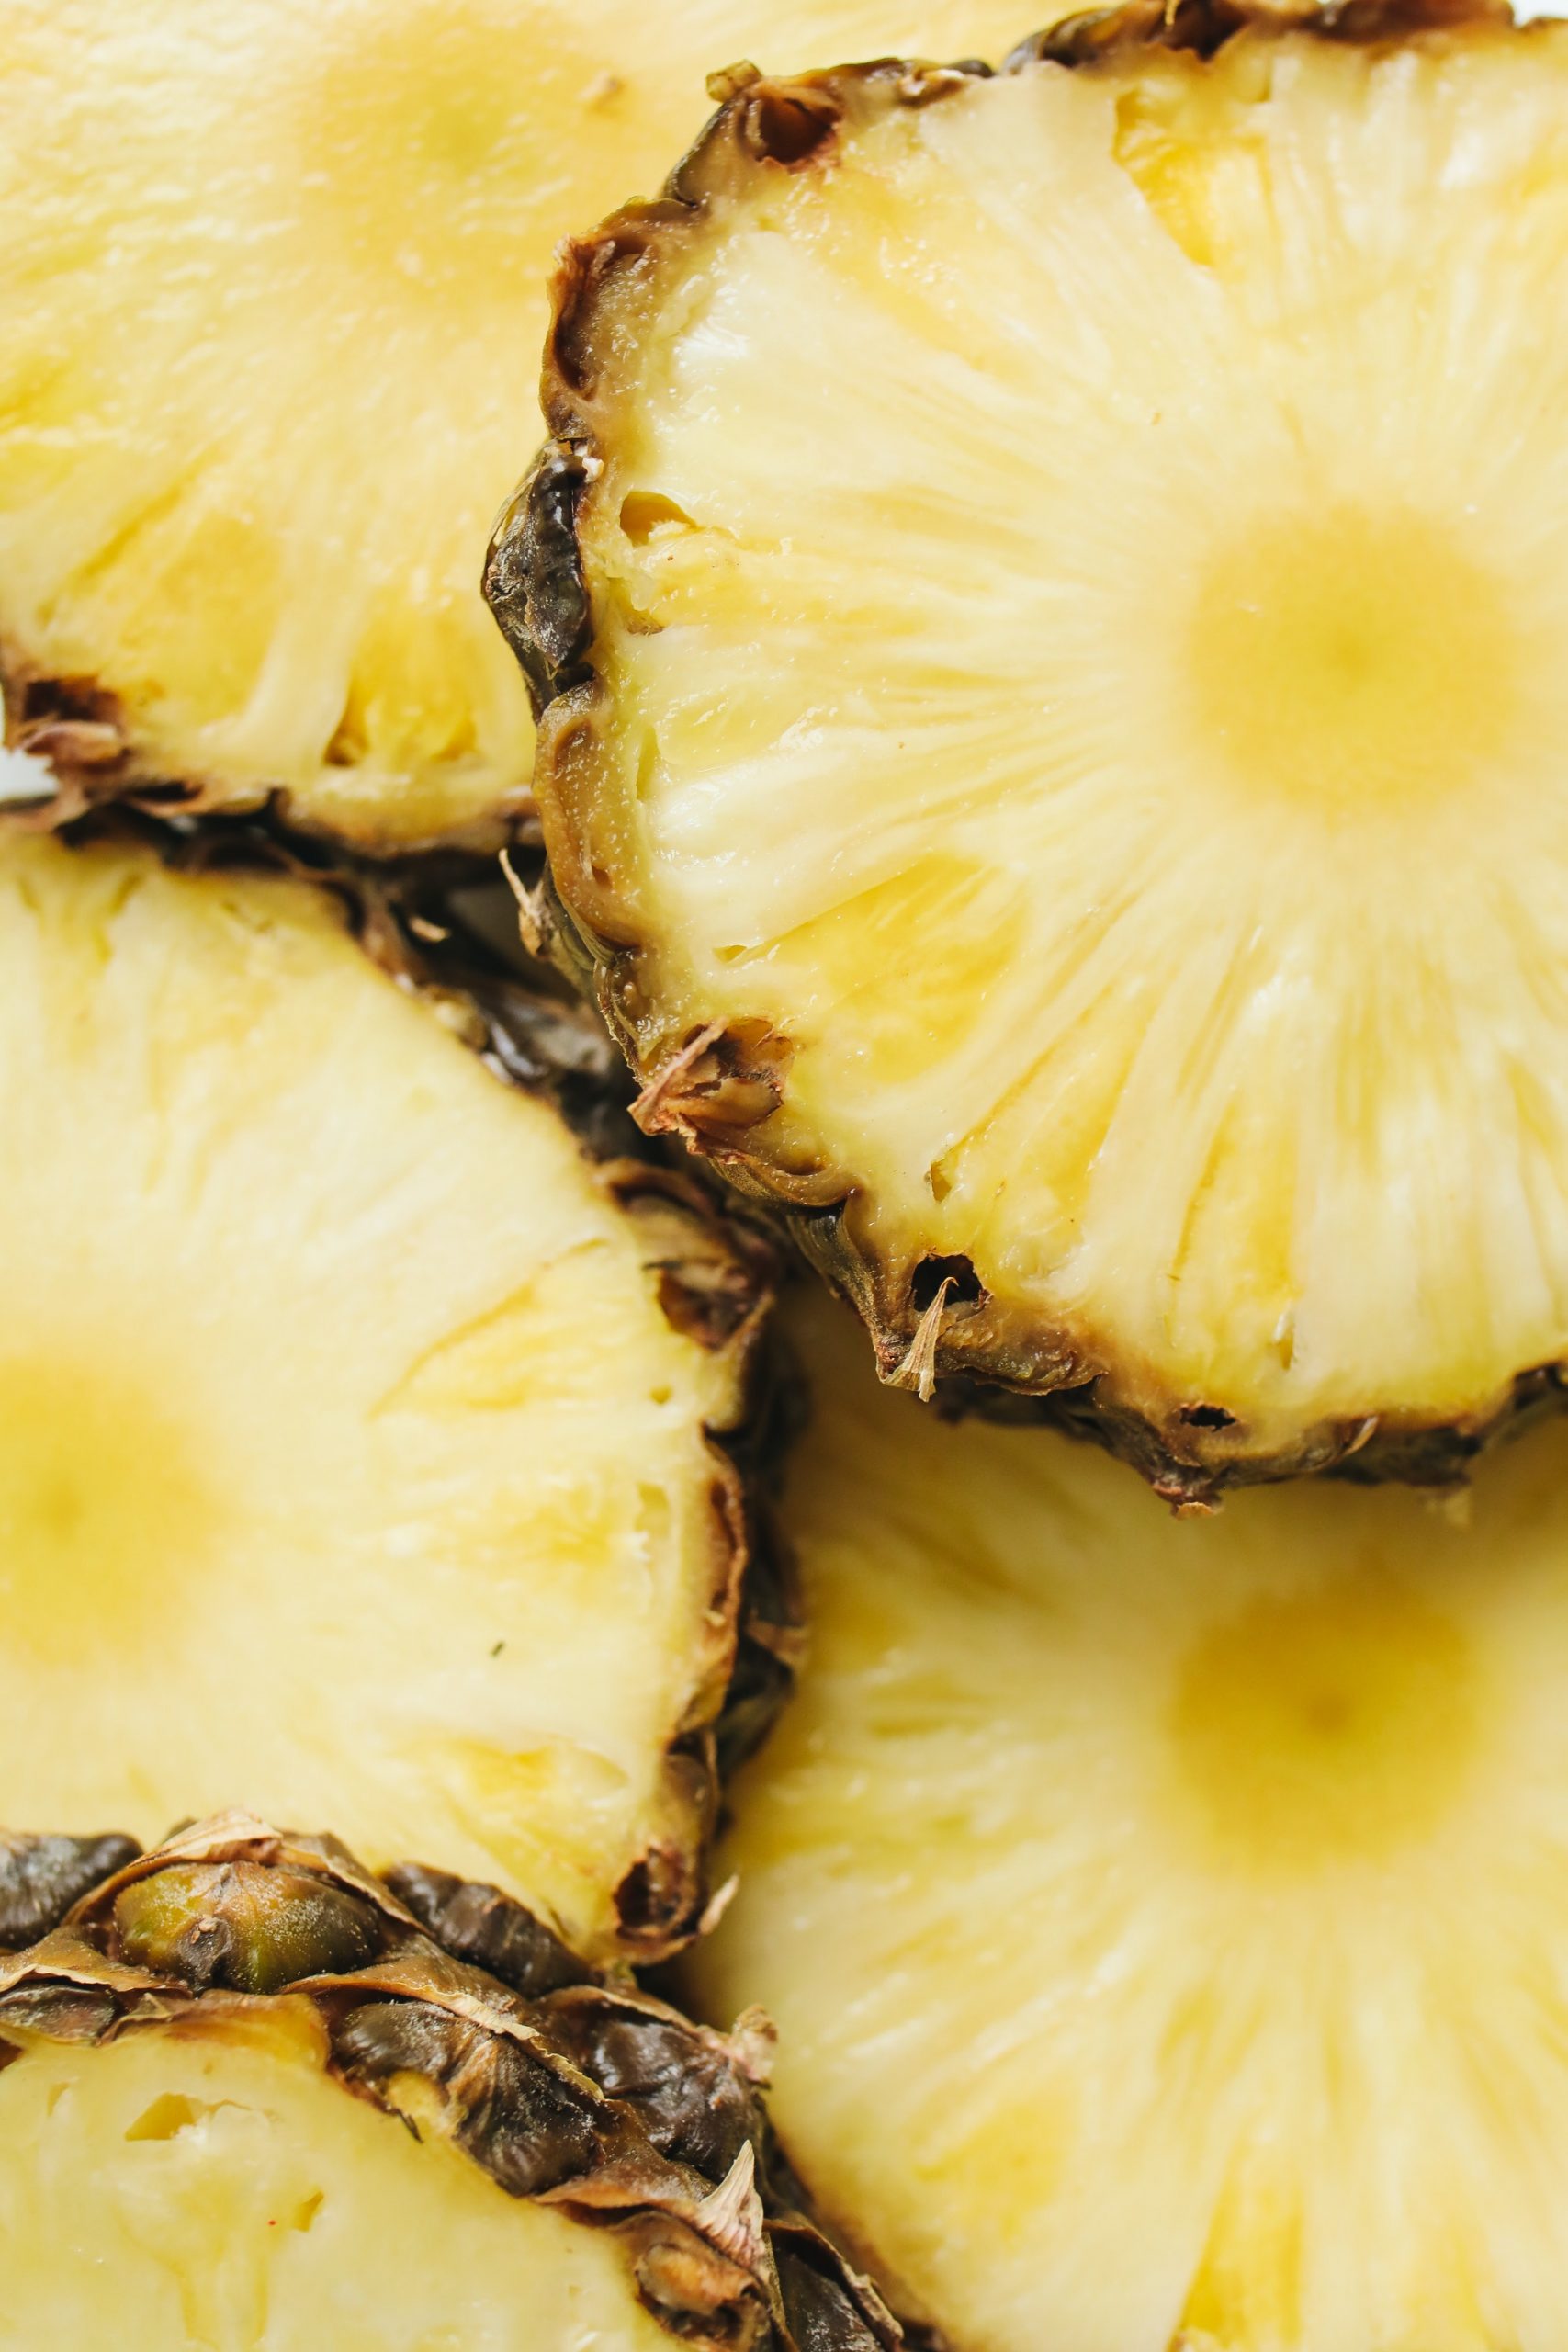 Pineapple slices are part of a healthy grocery shopping list.